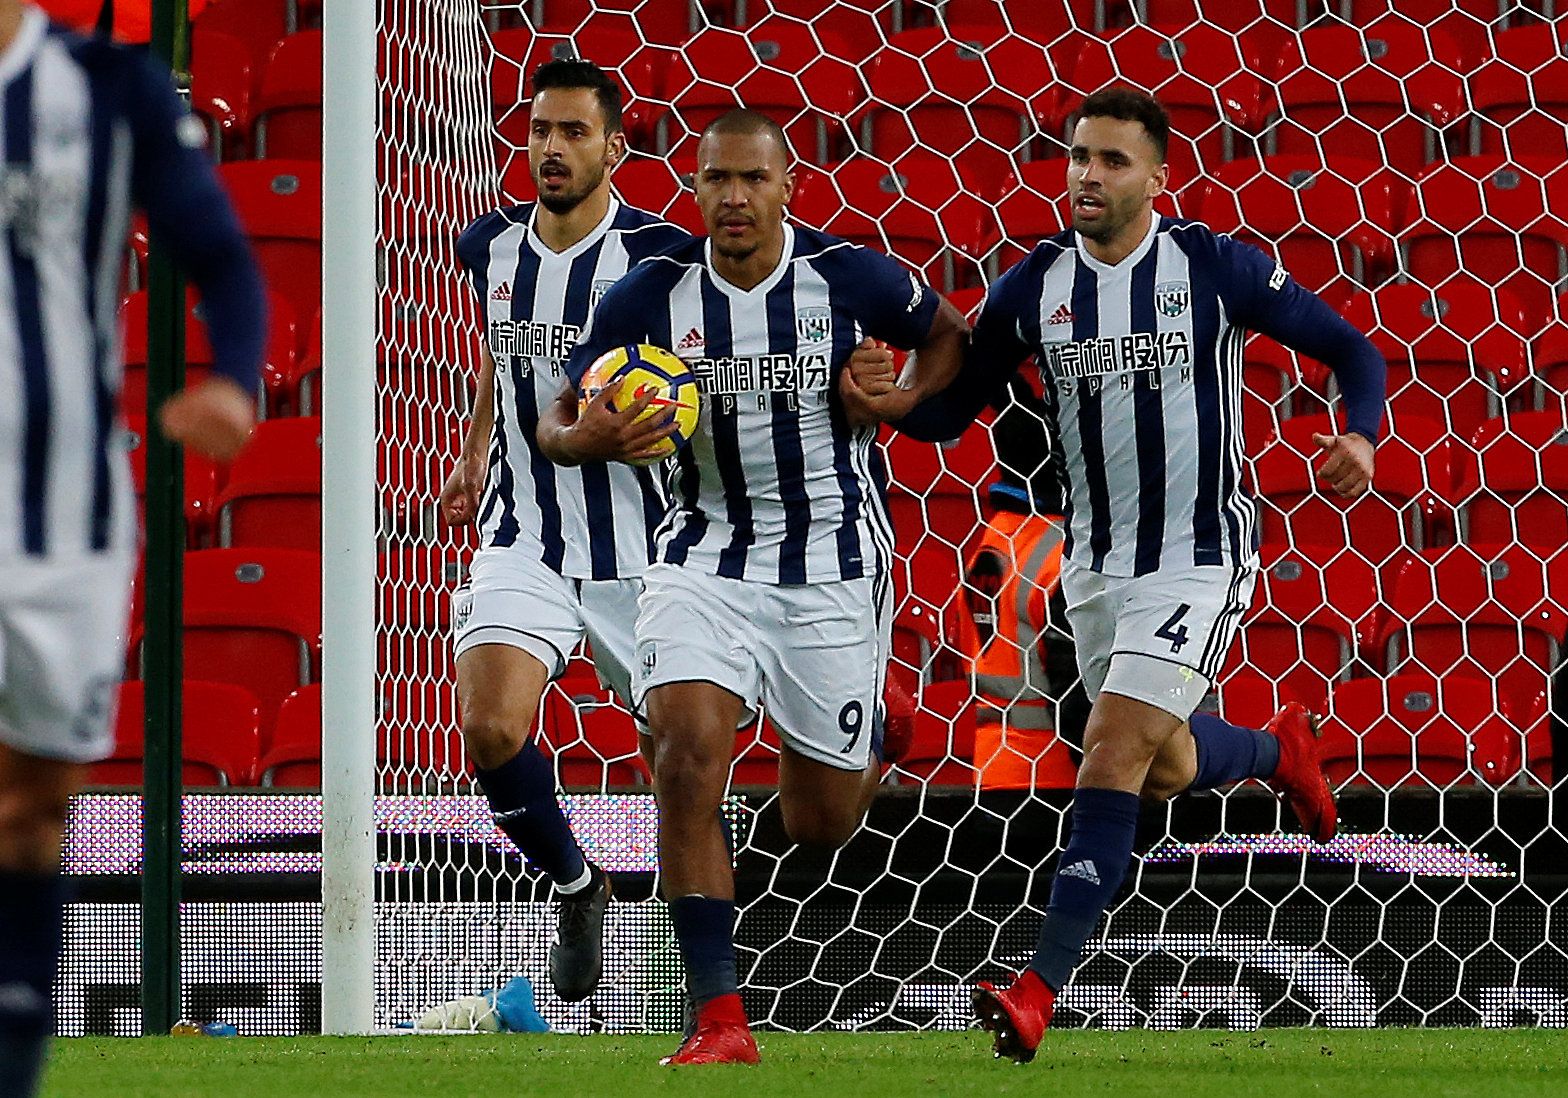 Soccer Football - Premier League - Stoke City vs West Bromwich Albion - bet365 Stadium, Stoke-on-Trent, Britain - December 23, 2017   West Bromwich Albion's Salomon Rondon celebrates scoring their first goal with Nacer Chadli and Hal Robson-Kanu    Action Images via Reuters/Craig Brough    EDITORIAL USE ONLY. No use with unauthorized audio, video, data, fixture lists, club/league logos or "live" services. Online in-match use limited to 75 images, no video emulation. No use in betting, games or s